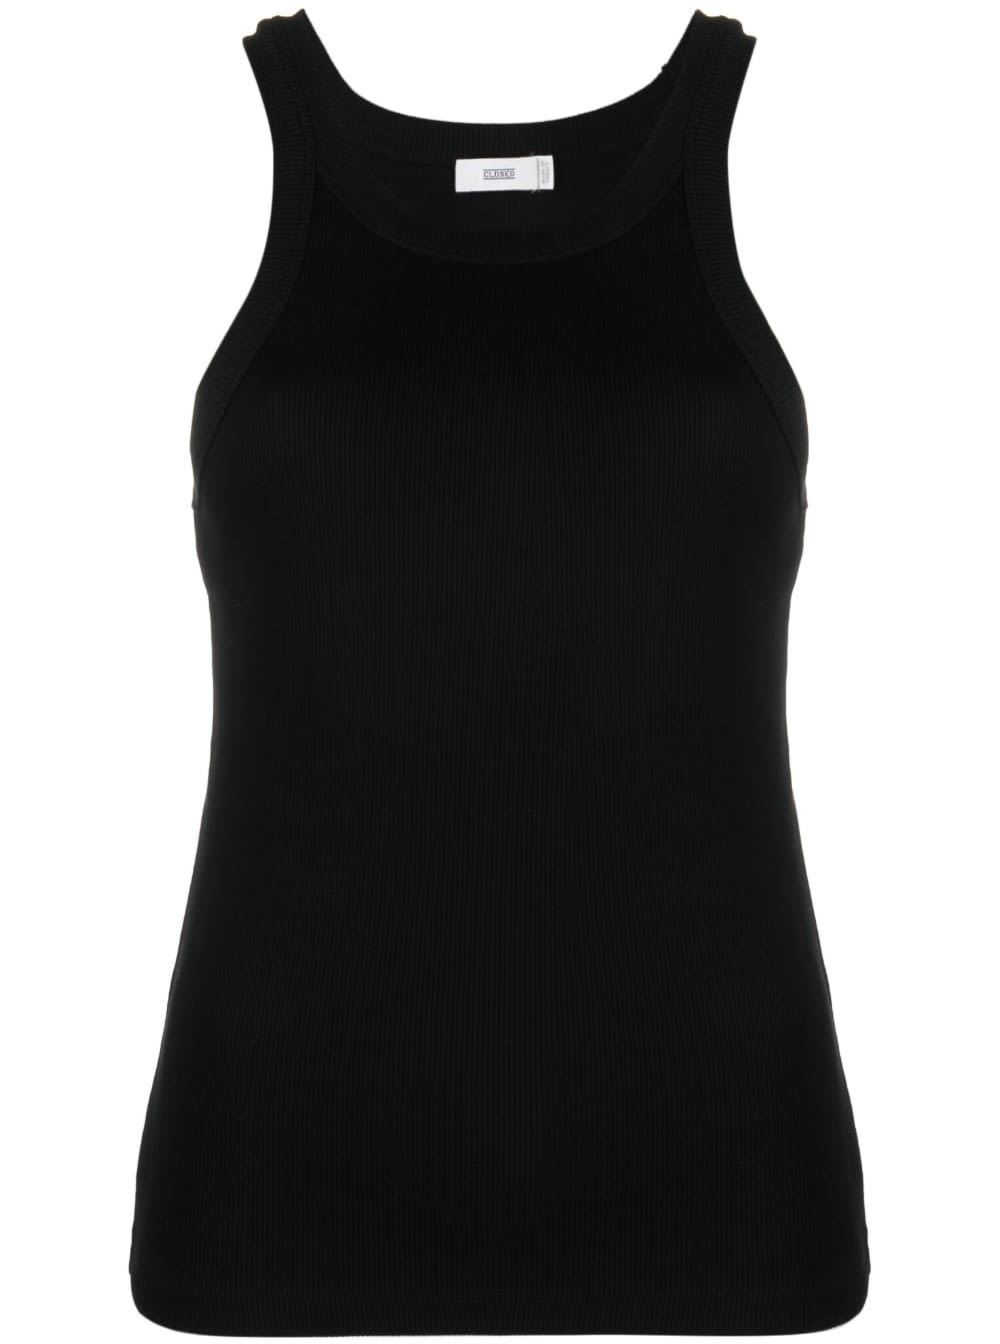 CLOSED BLACK SLEEVELESS RIBBED TOP IN COTTON STRATCH WOMAN